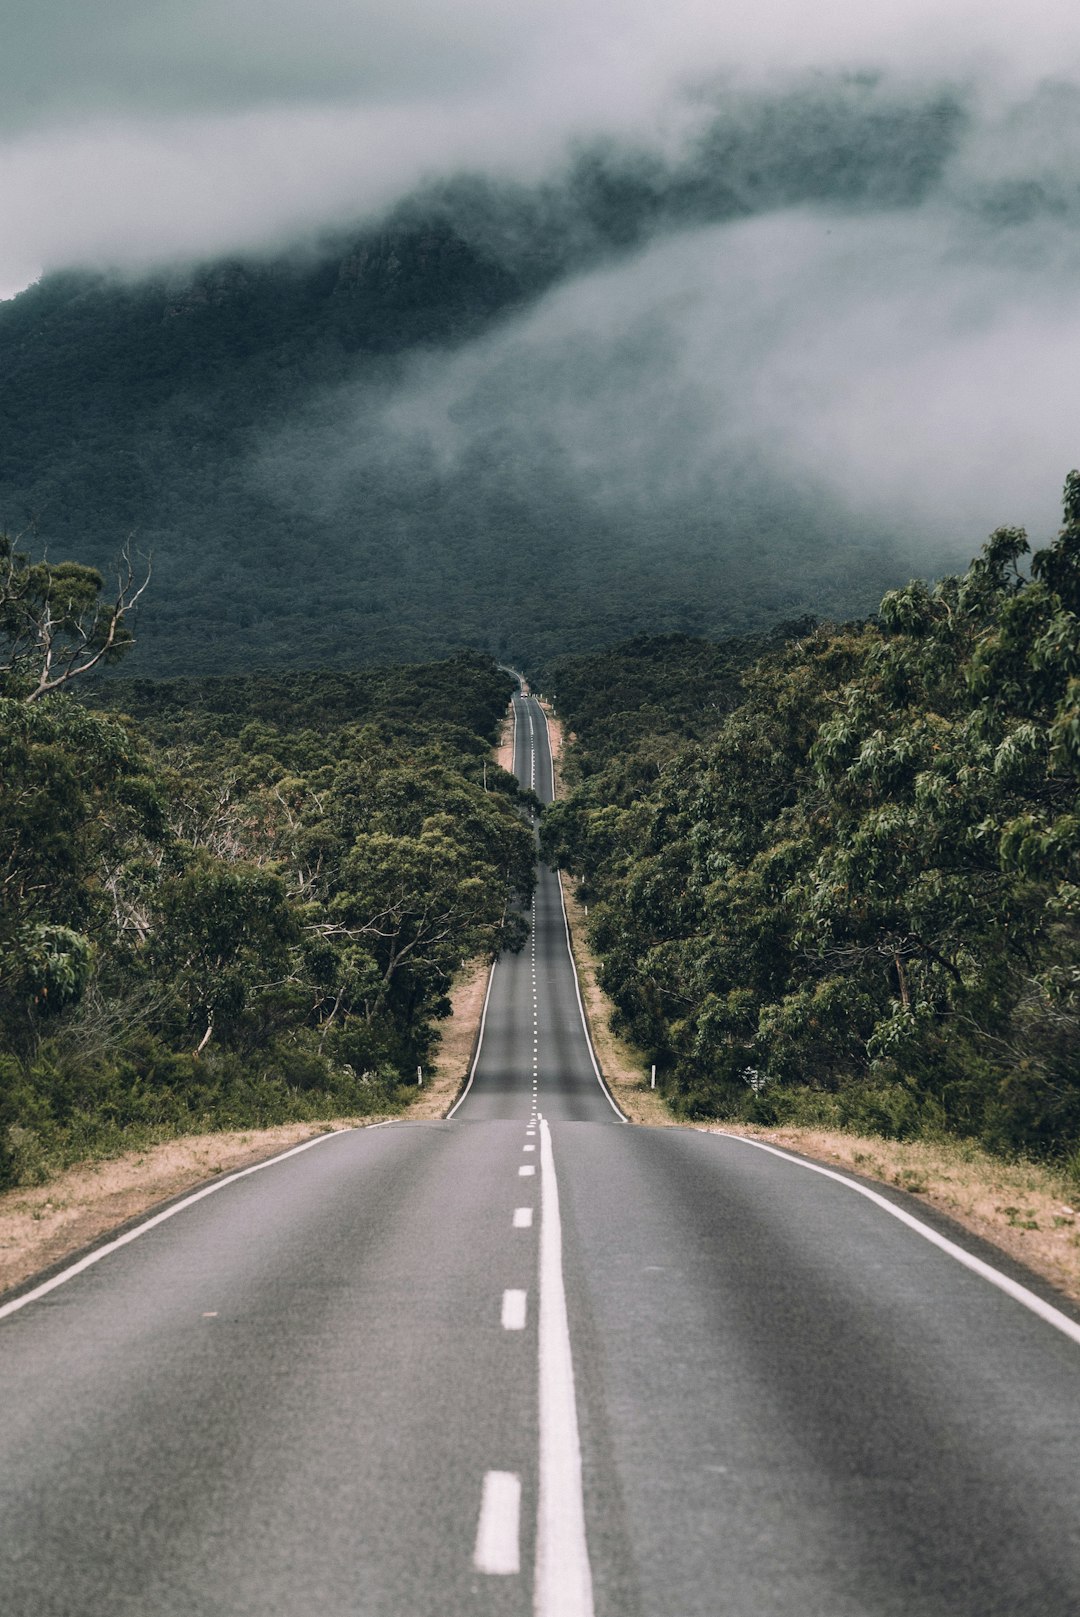 travelers stories about Road trip in Grampians National Park, Australia